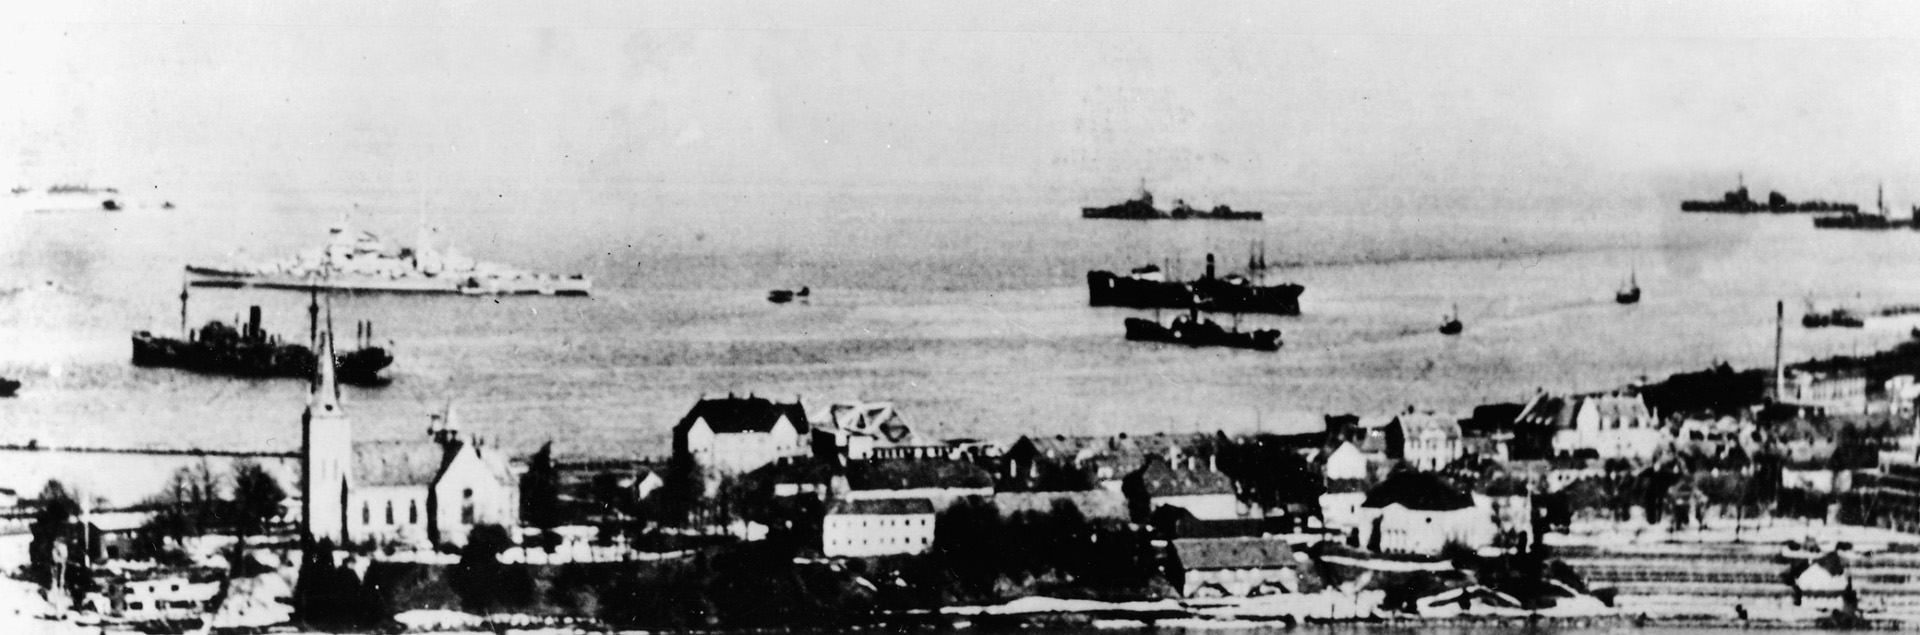 Elements of a German naval contingent lie anchored off the coast of Trondheim. 